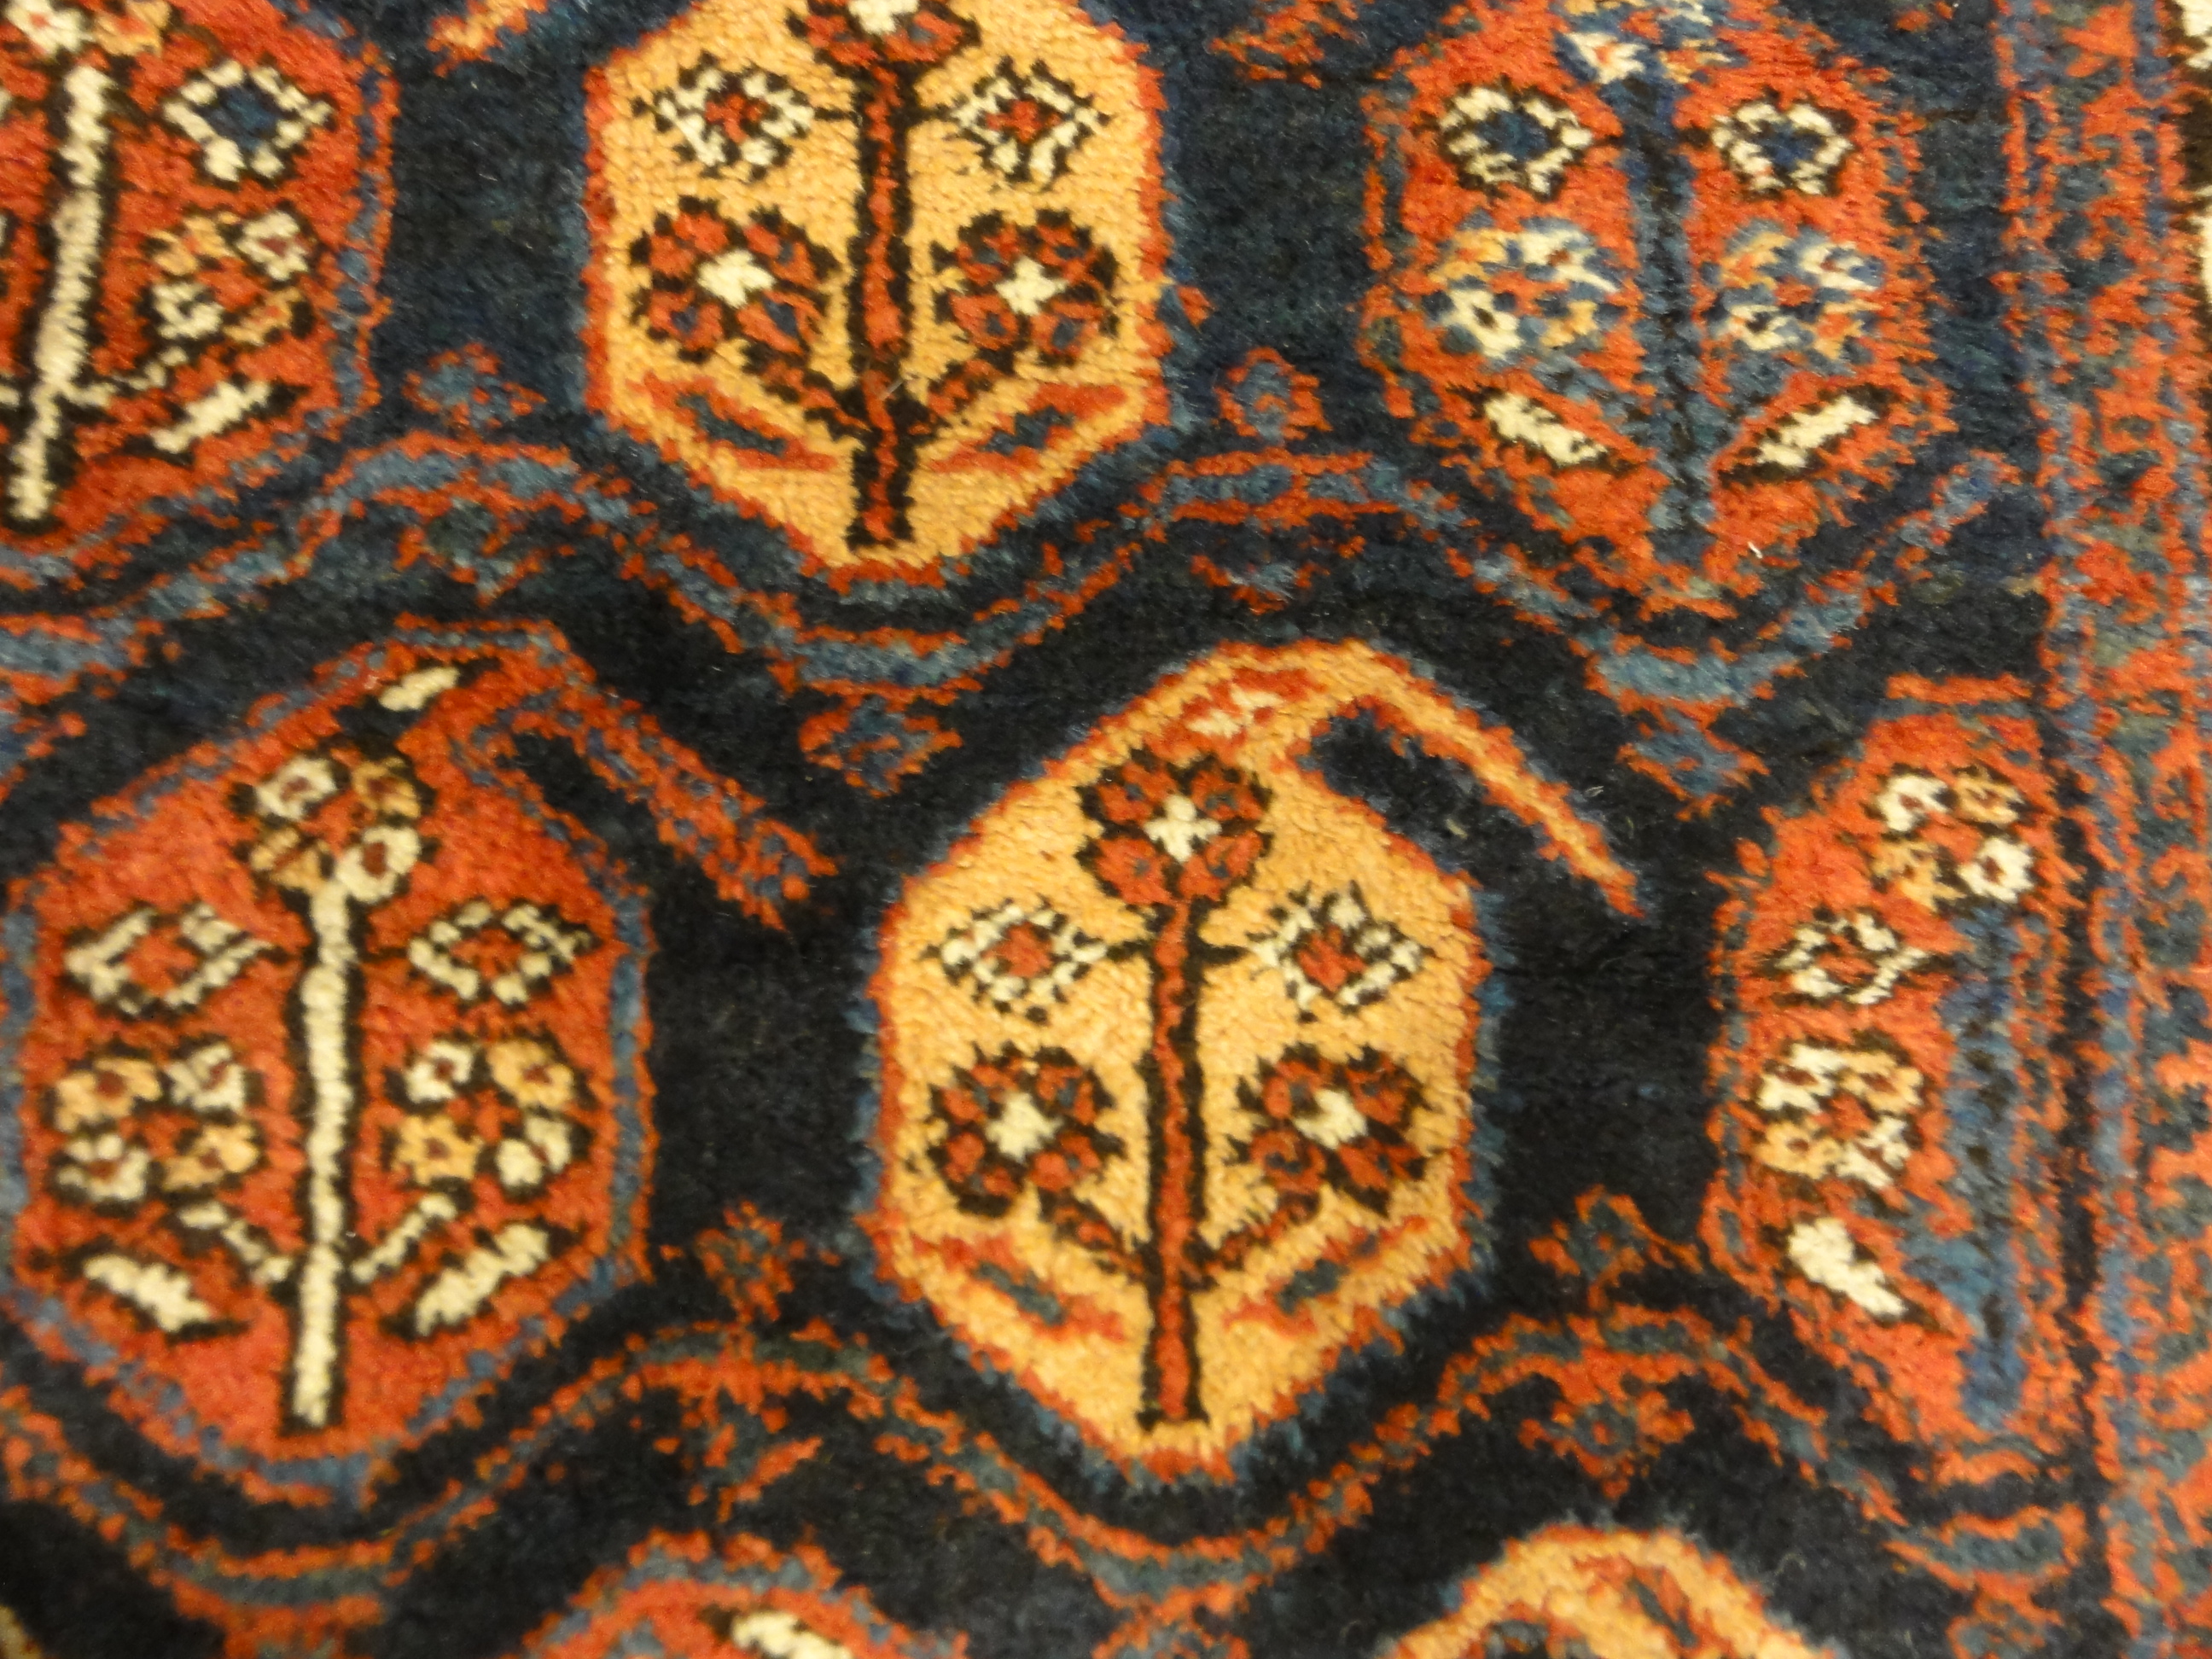 Rare 1870s Antique Boteh Afshar. A piece of authentic genuine antique woven carpet art sold by Santa Barbara Design Center, Rugs and More.